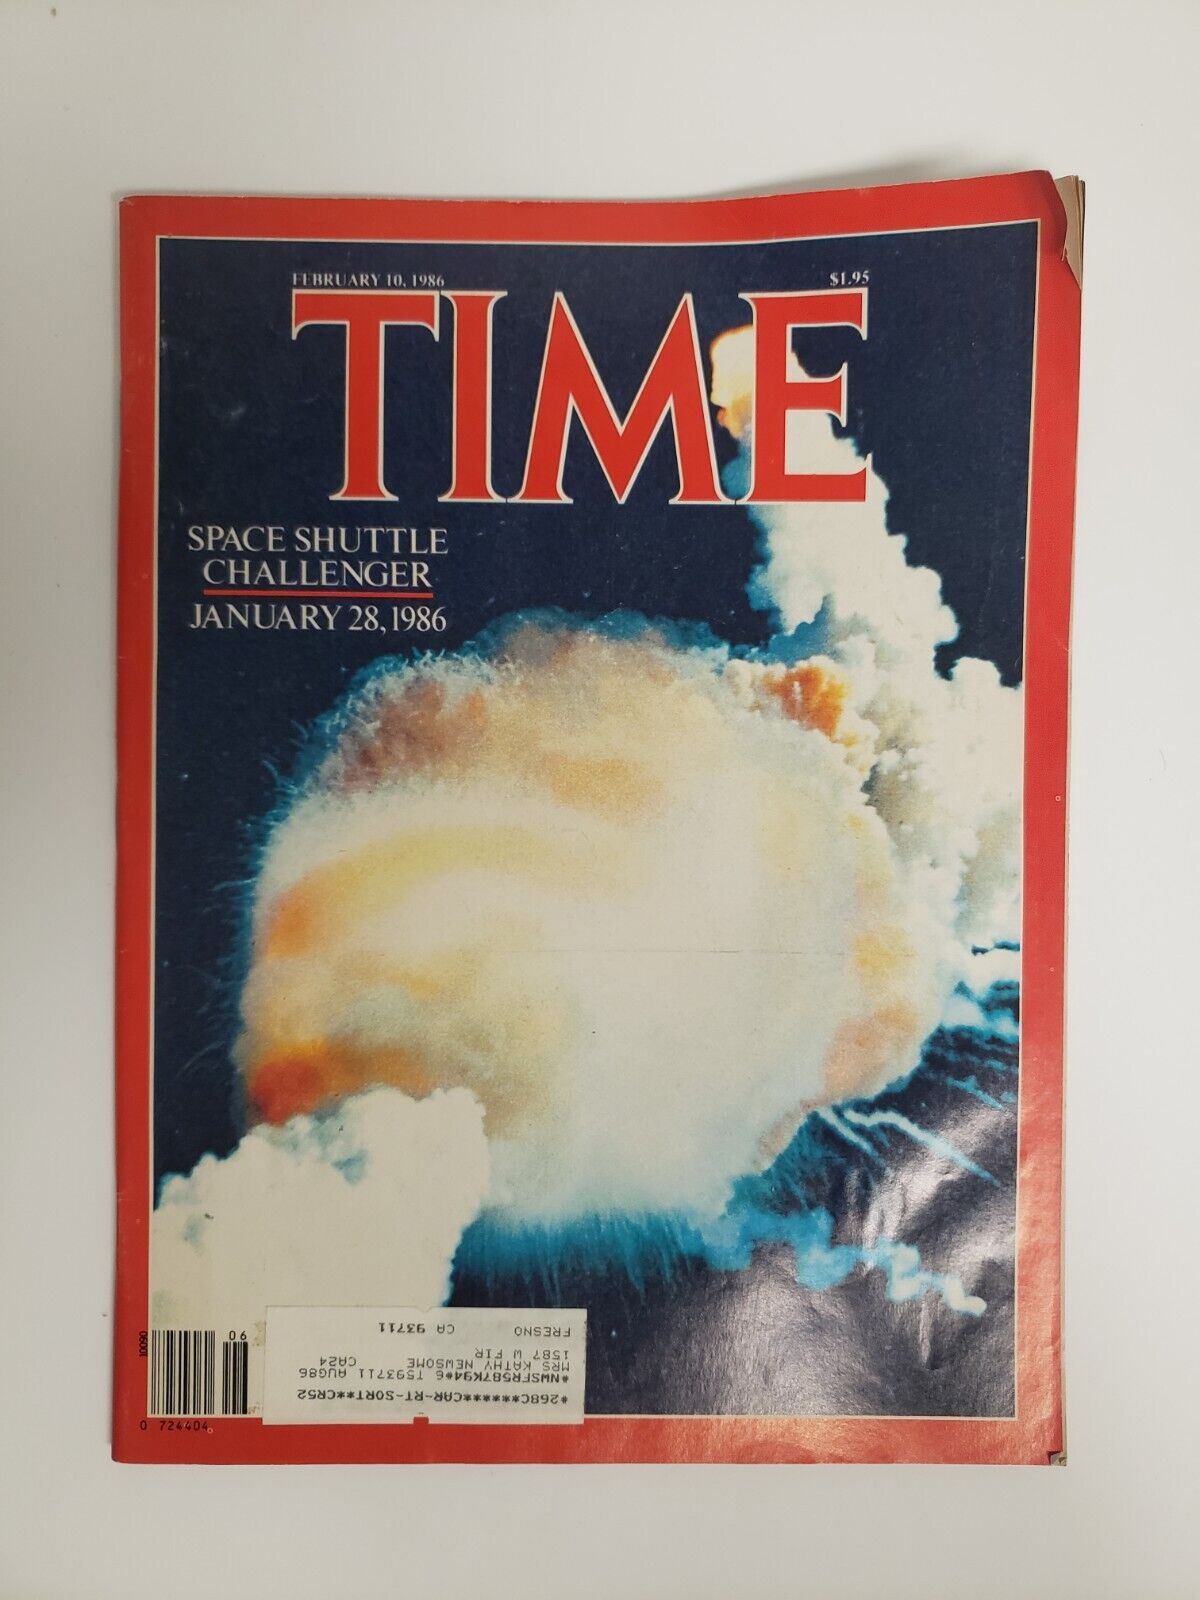 Time Magazine (February 10, 1986) Space Shuttle Challenger